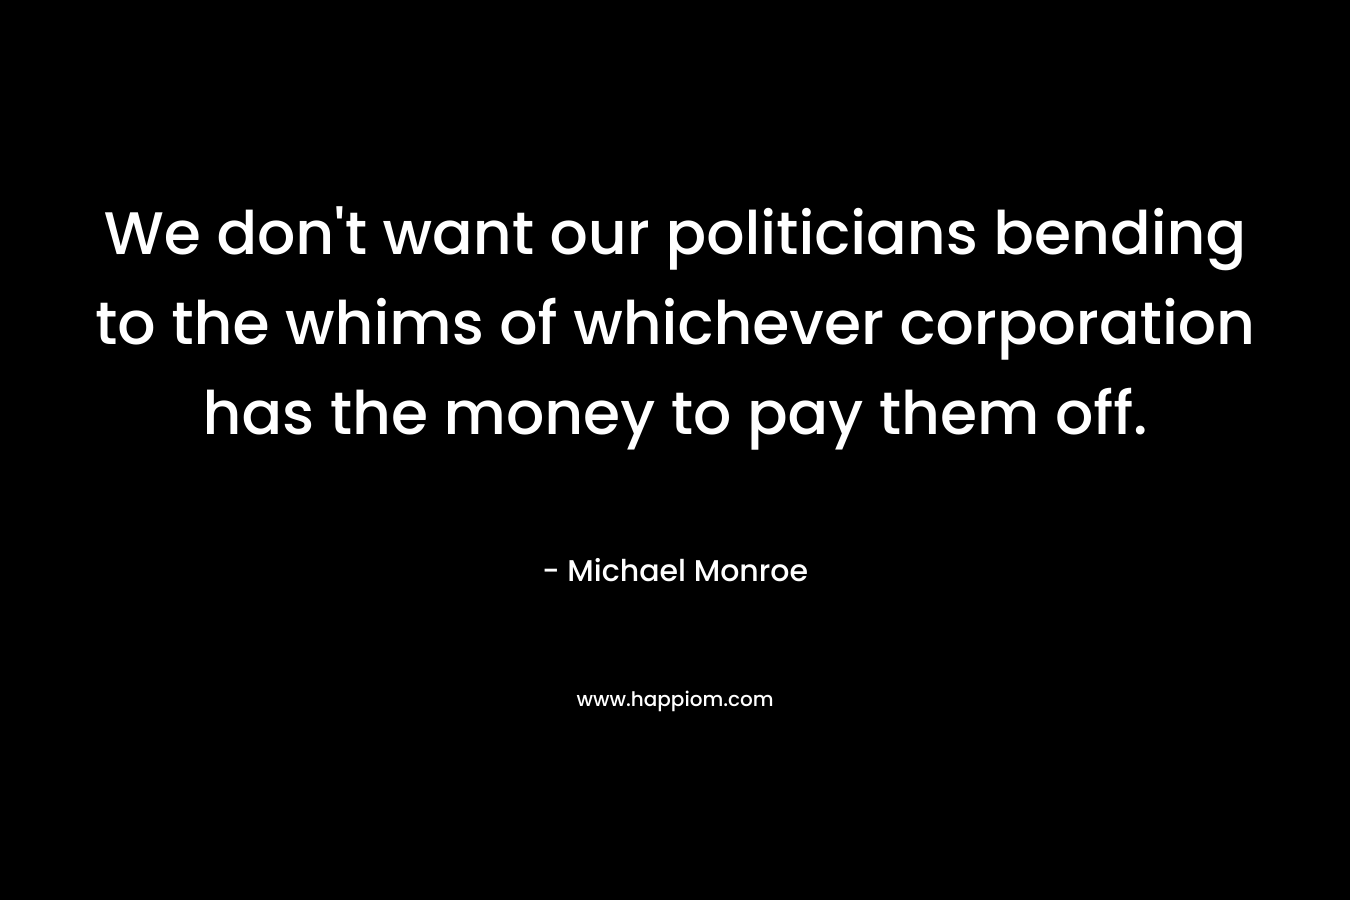 We don’t want our politicians bending to the whims of whichever corporation has the money to pay them off. – Michael Monroe